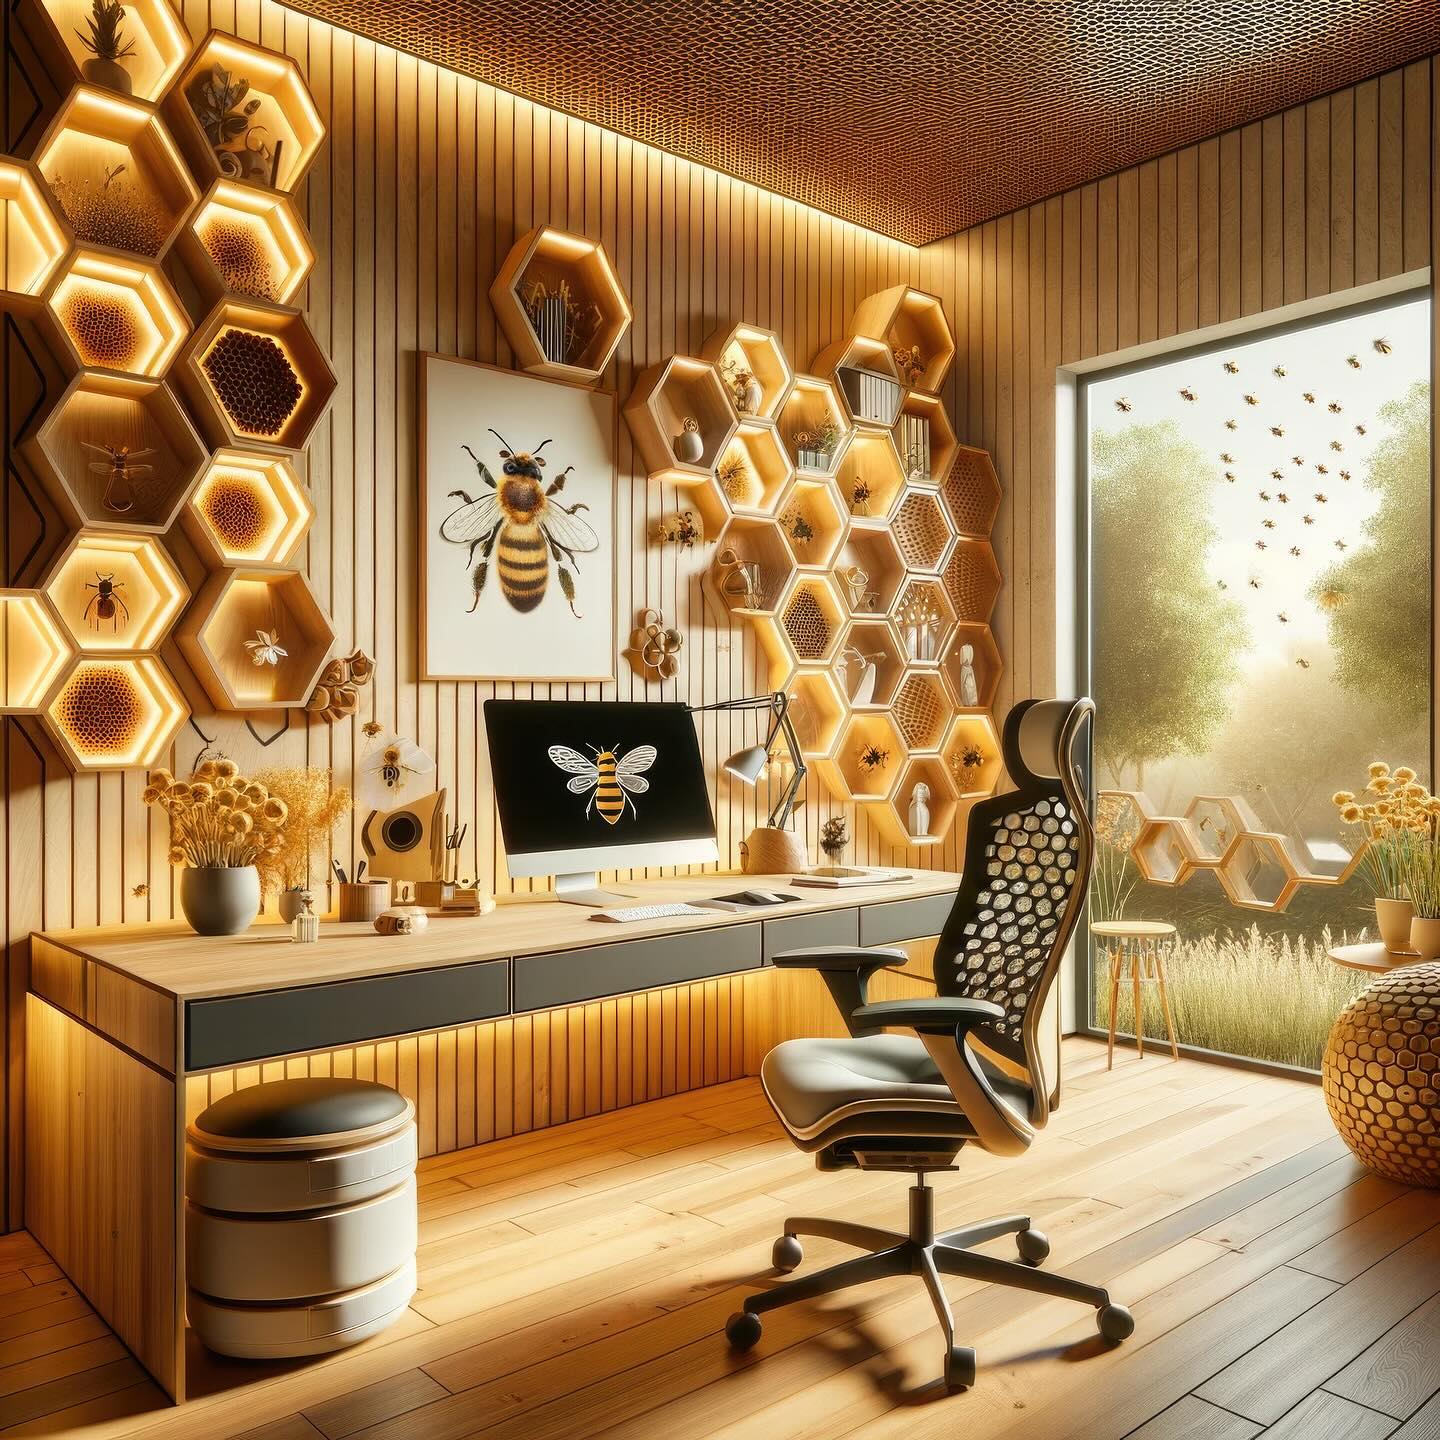 Honeycomb Inspired Furniture: Creative Designs and Trendy Furnishings